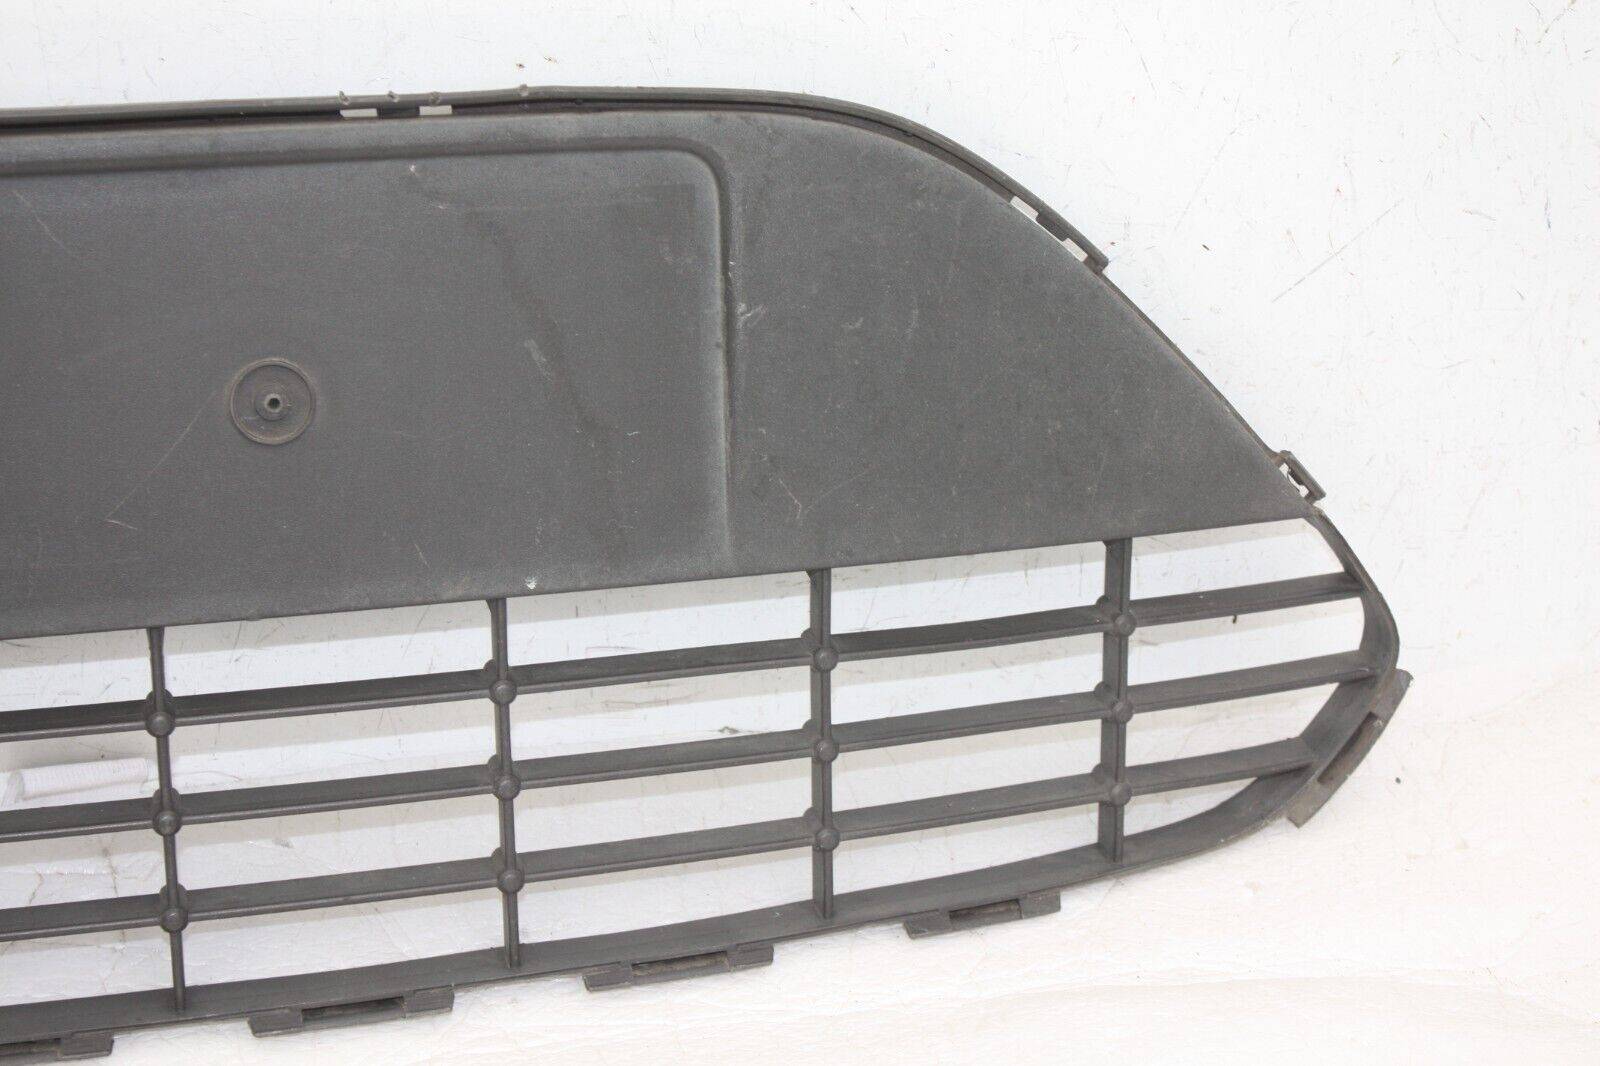 Ford-Focus-Front-Bumper-Grill-2008-TO-2011-8M51-17B968-BE-Genuine-DAMAGED-176410989719-2